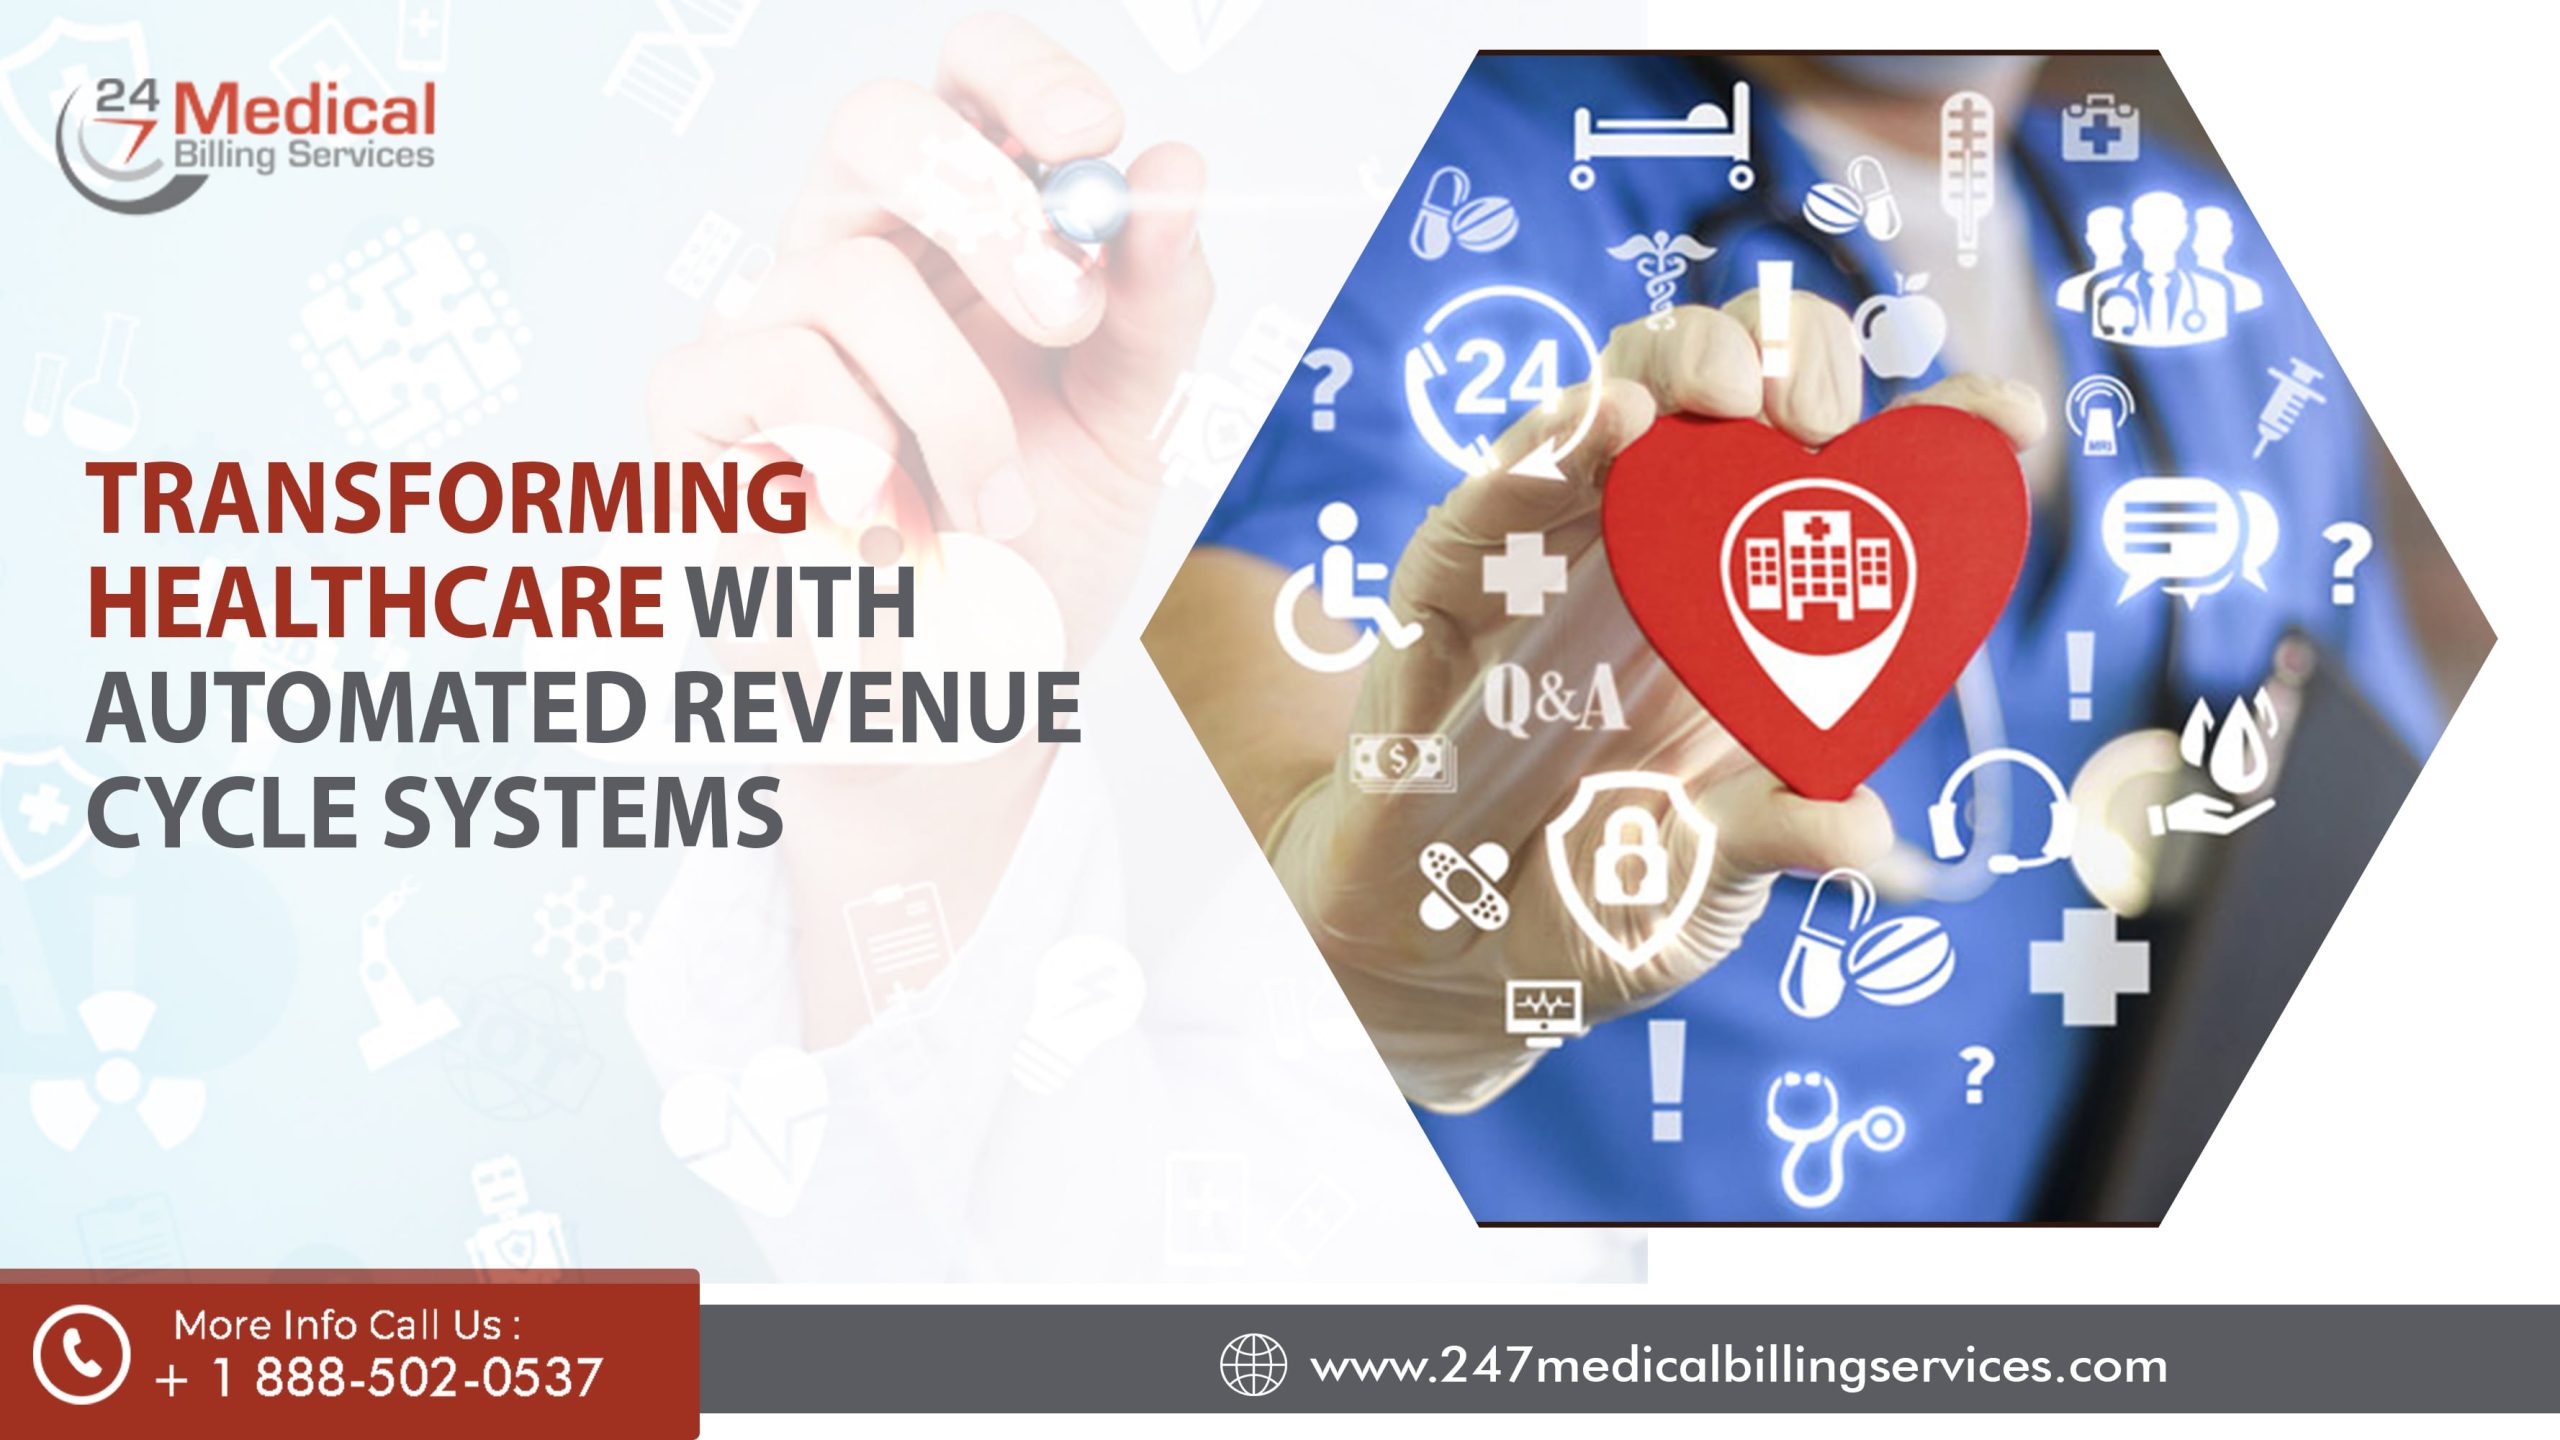  Transforming Healthcare with Automated Revenue Cycle Systems